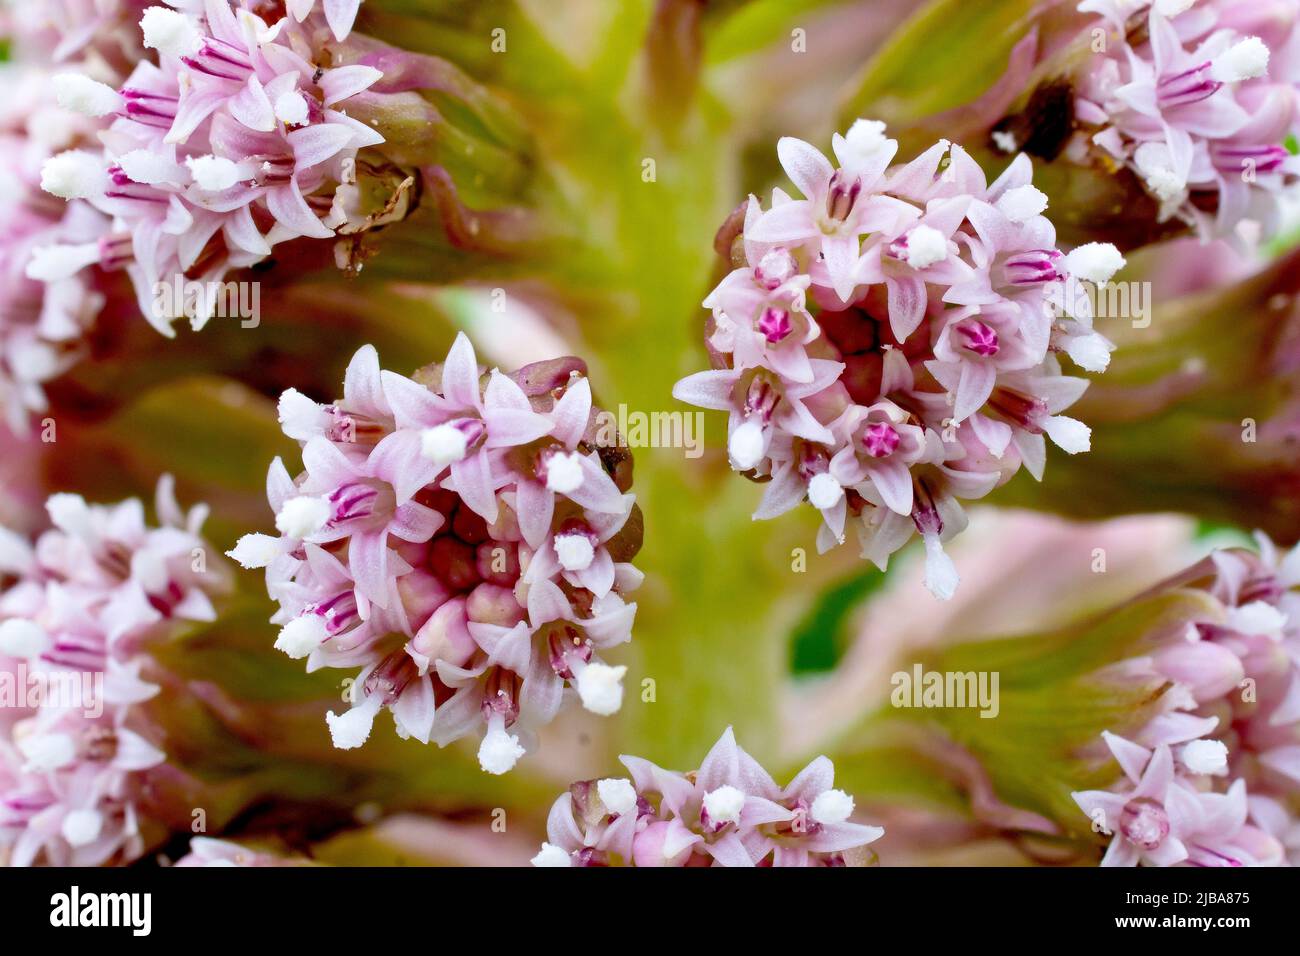 Butterbur (petasites hybridus), close up of the small tufts of flowers that make up the large cone-shaped inflorescences that appear in spring. Stock Photo